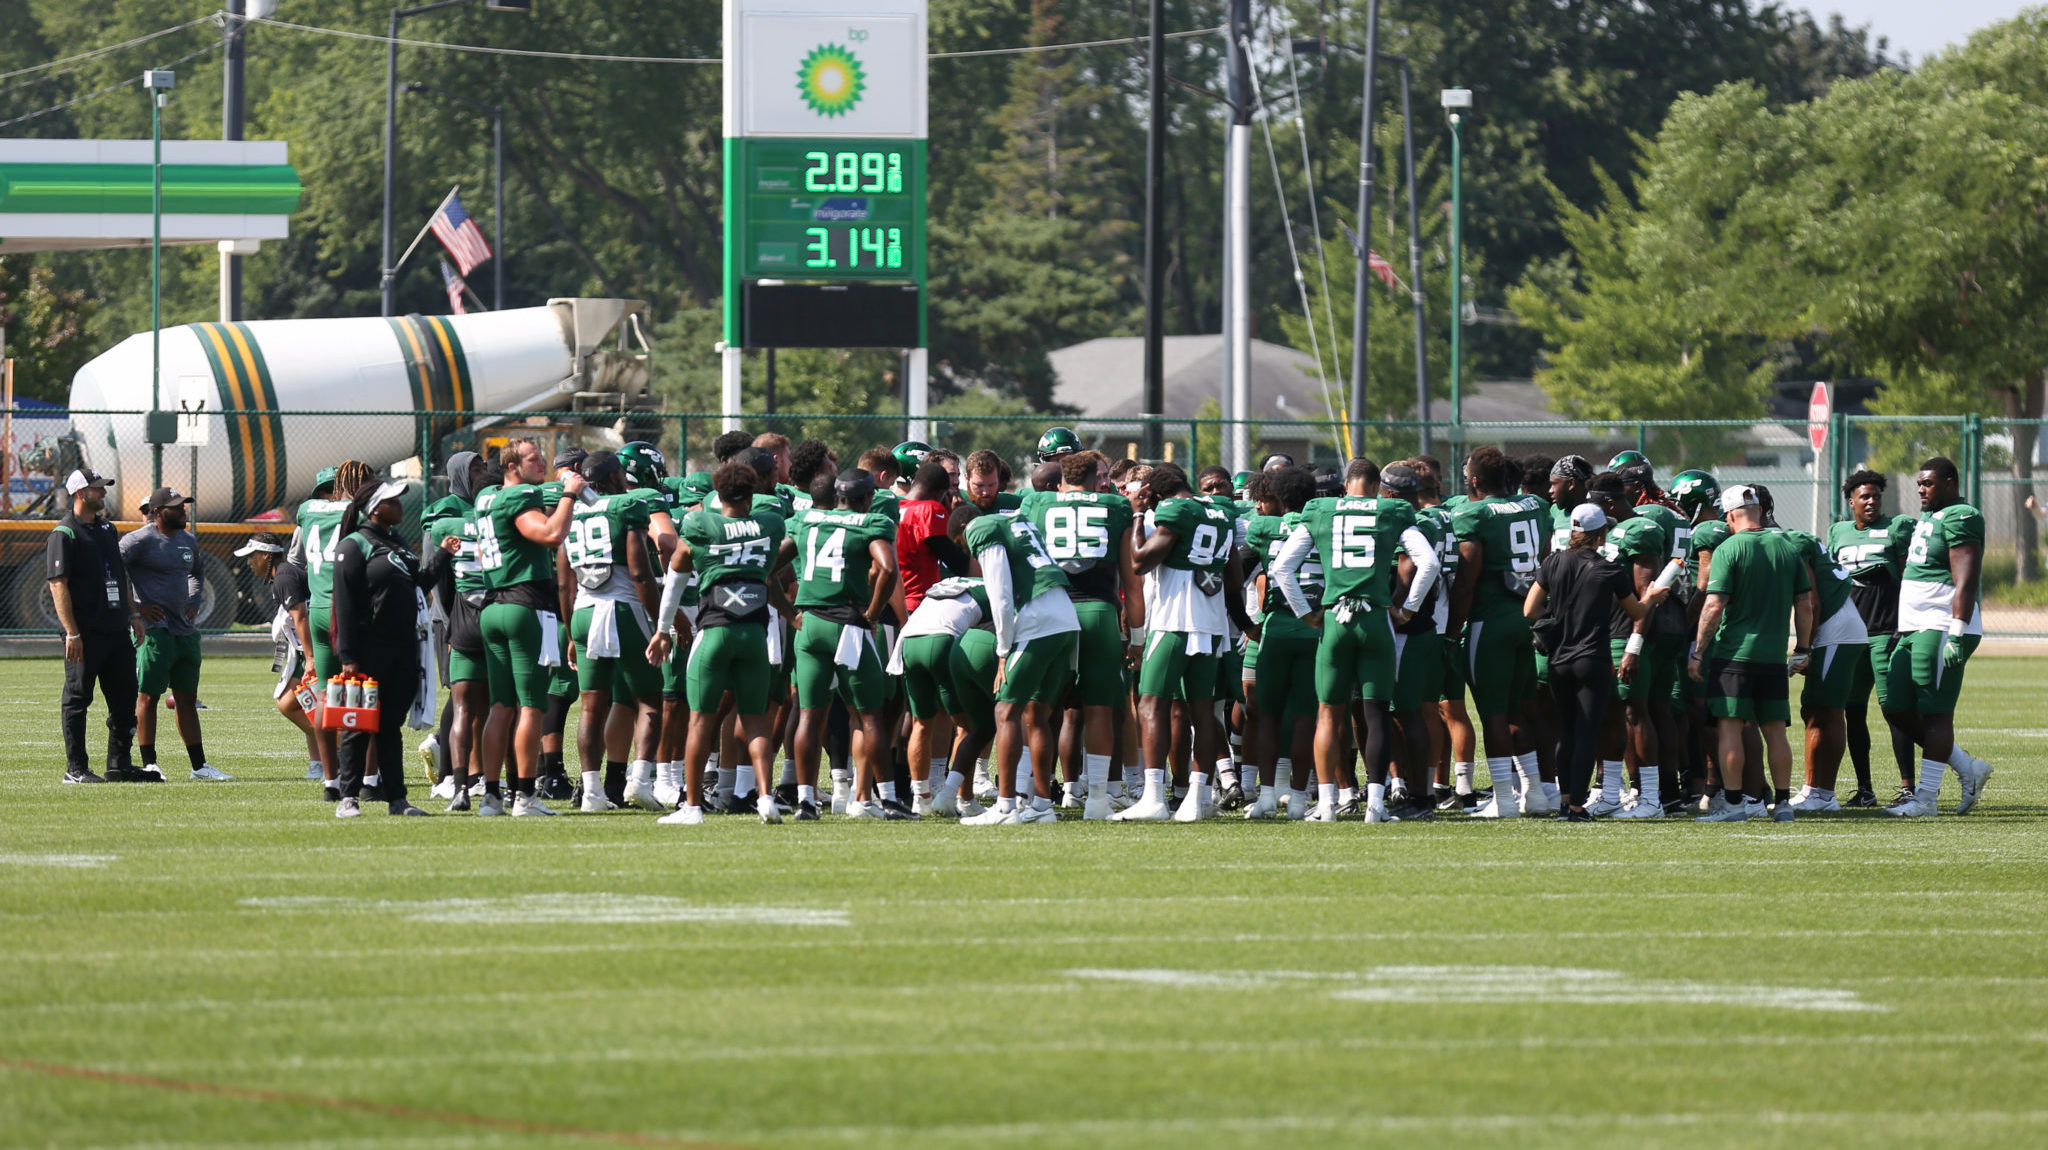 ASHWAUBENON, WI - AUGUST 19: The New York Jets huddle during a joint training camp practice with the Green Bay Packers and the New York Jets at Ray Nitschke Field on August 19, 2021 in Ashwaubenon, WI.